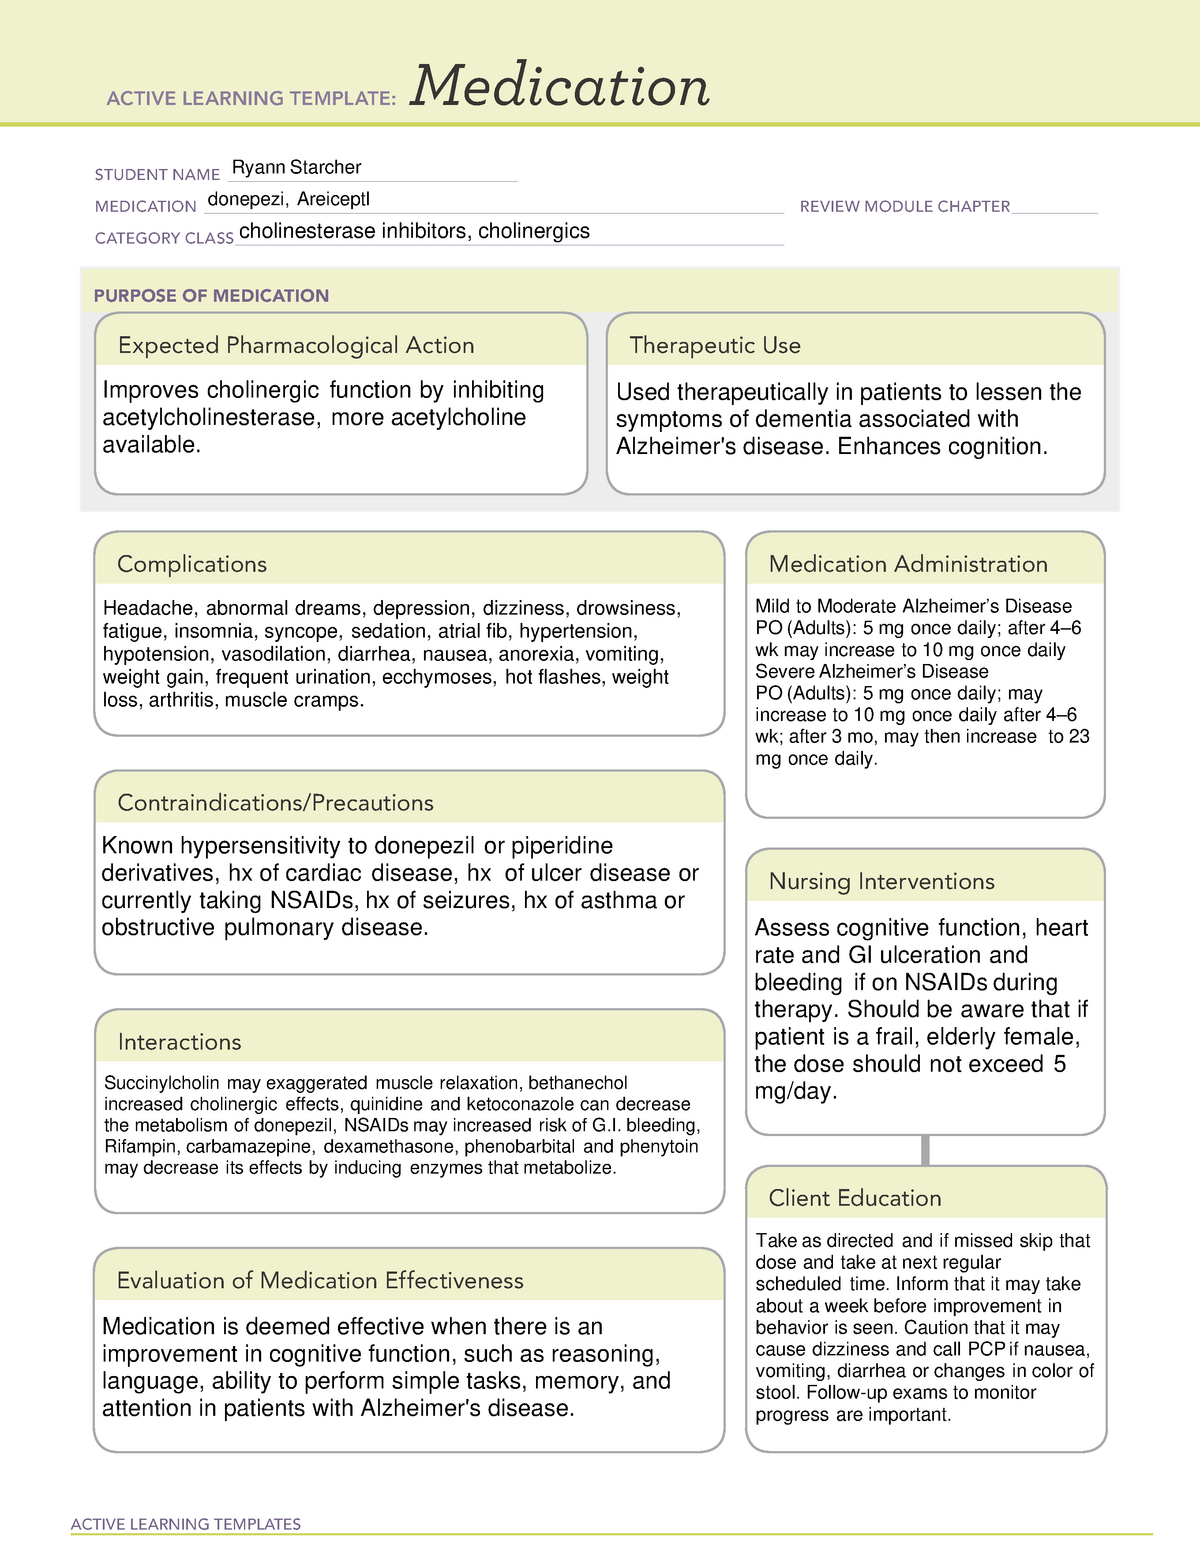 Donepezil Medication Template for NCLEX based medication ACTIVE